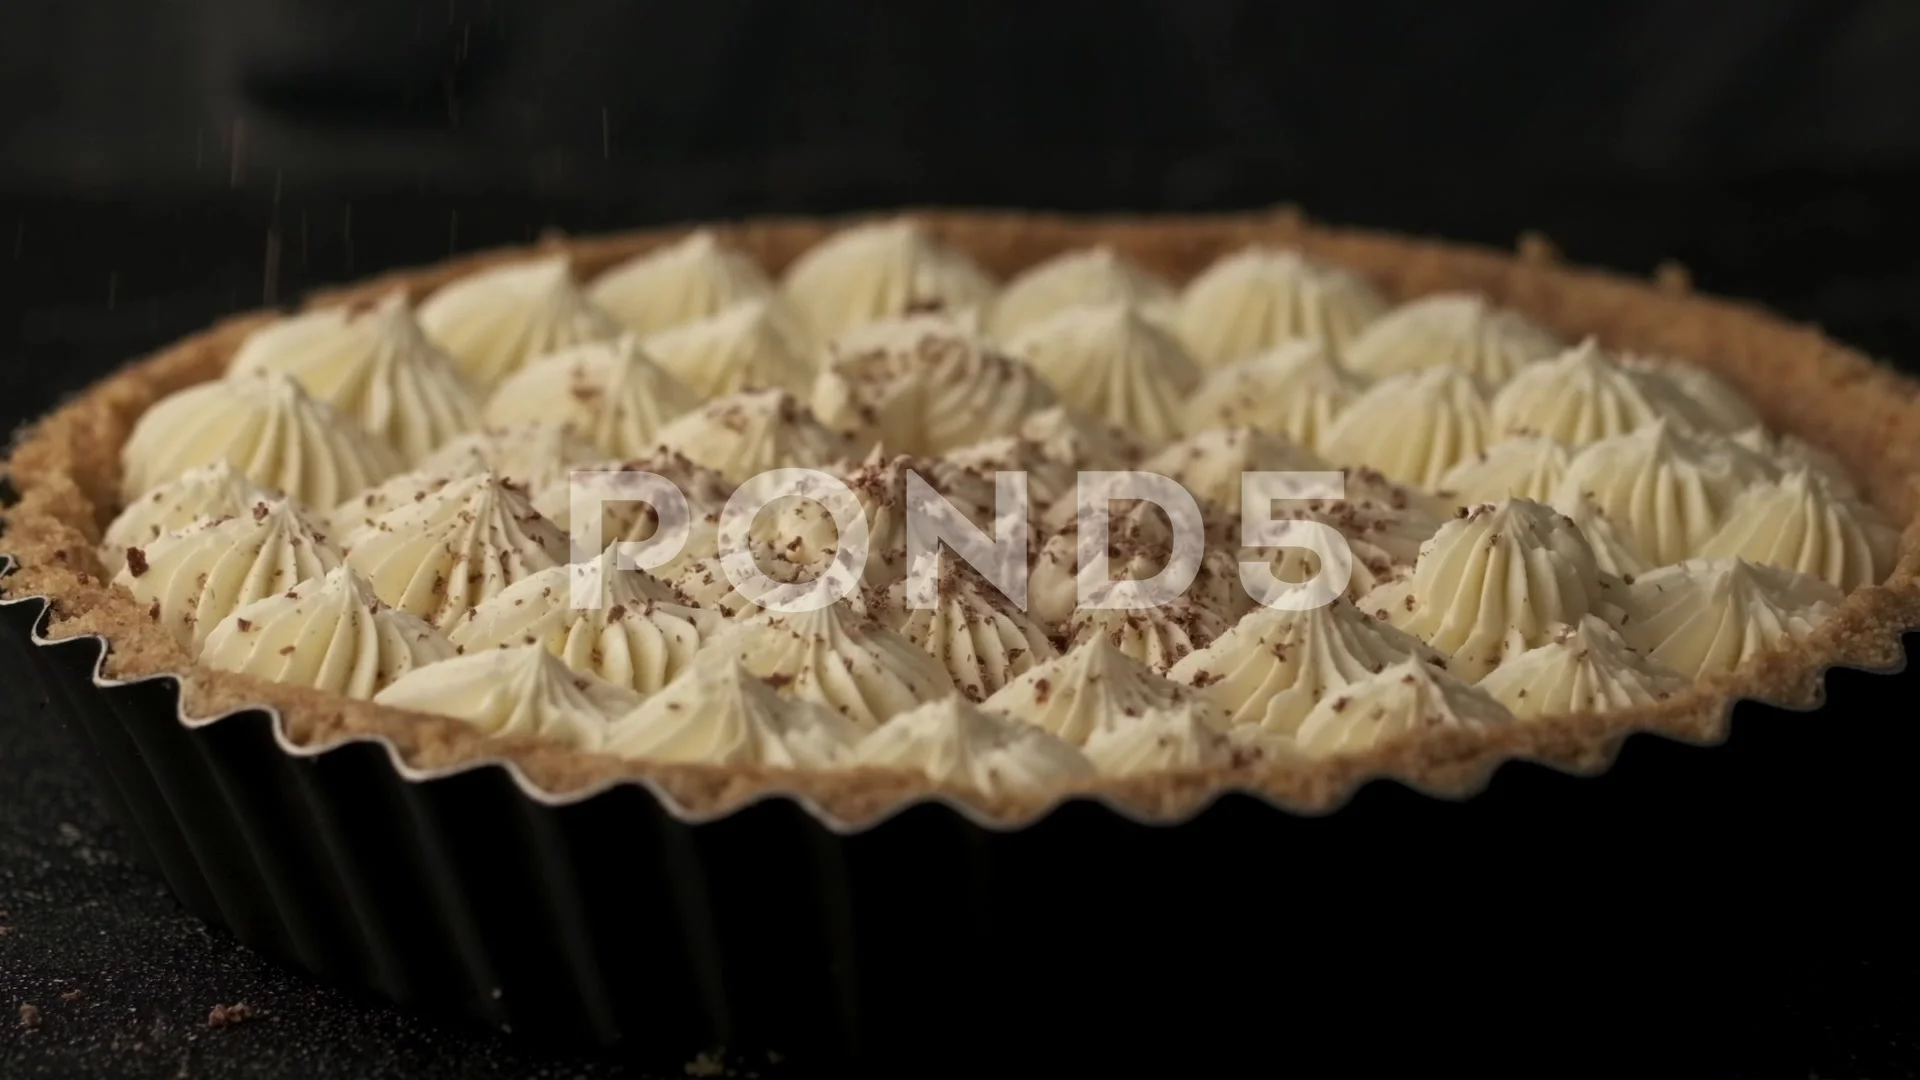 Banoffee meringue pie - Passion For Baking :::GET INSPIRED:::